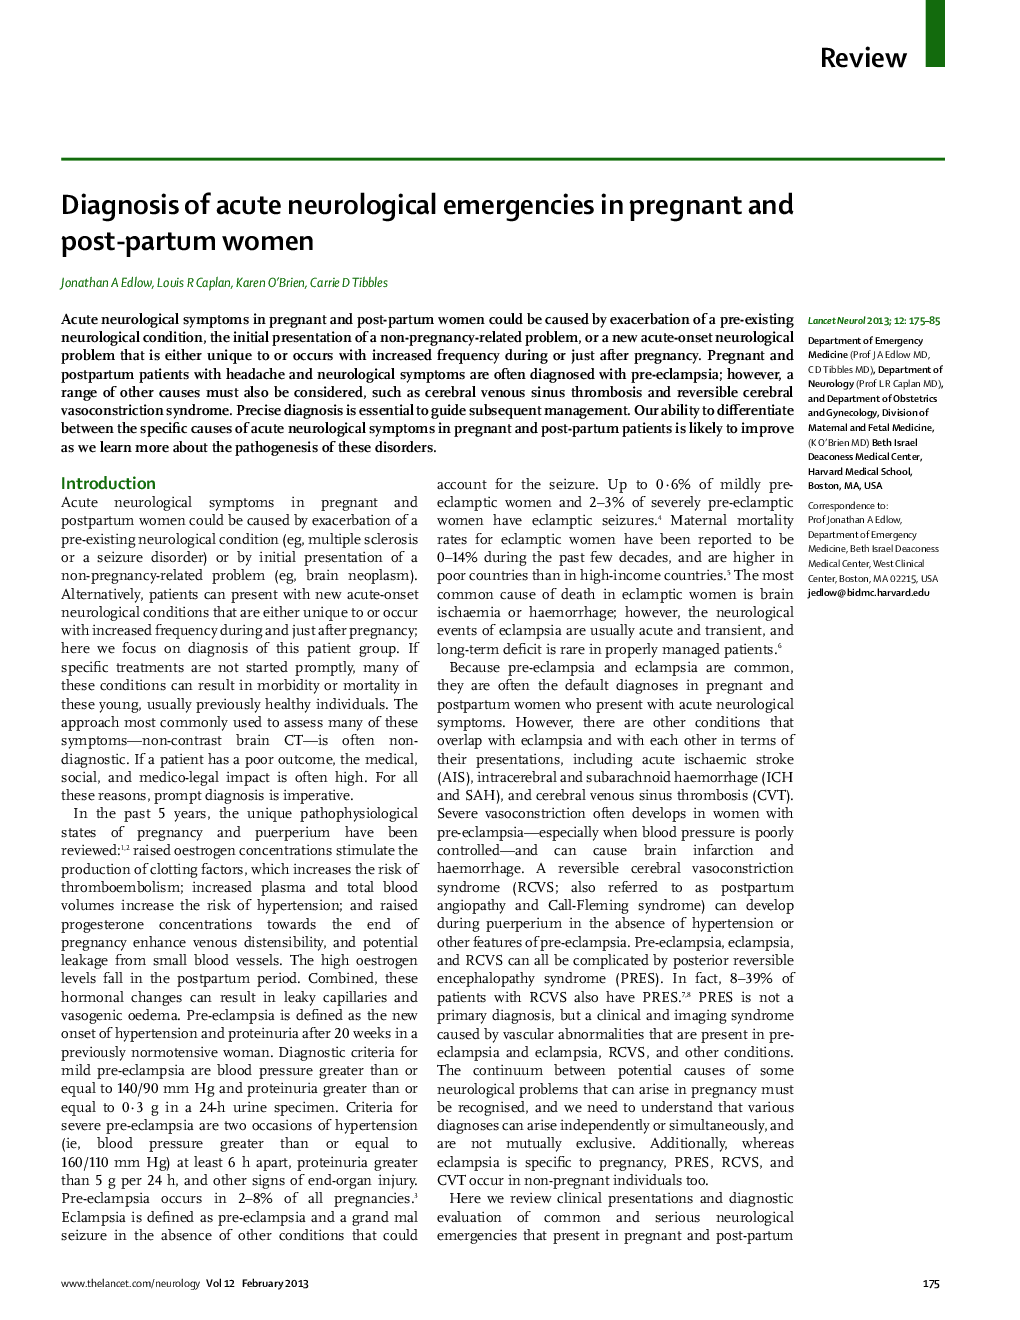 Diagnosis of acute neurological emergencies in pregnant and post-partum women